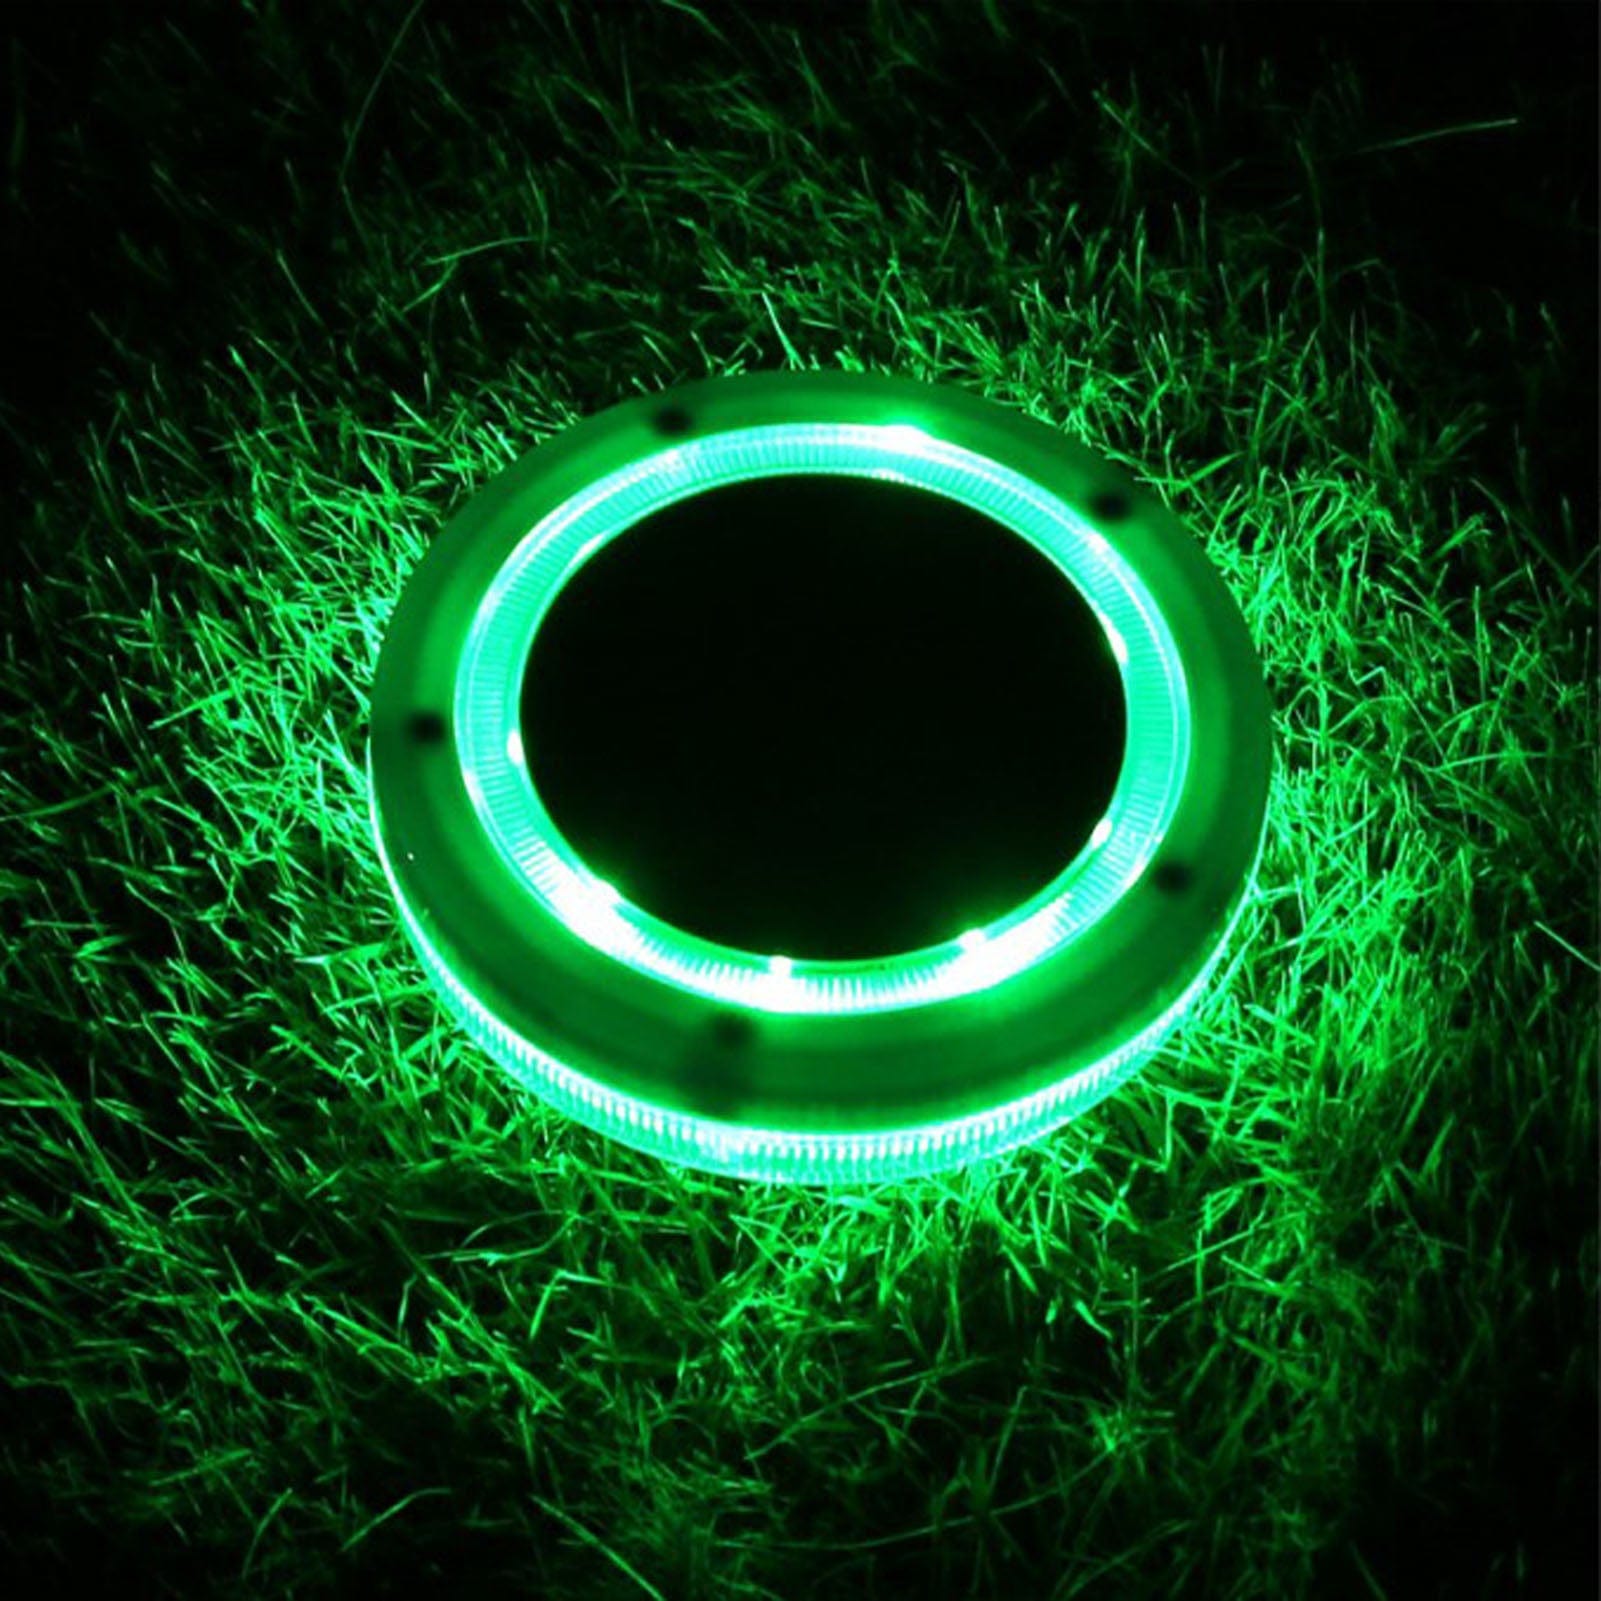 Solar Floating Pool Light for Outdoor Decoration